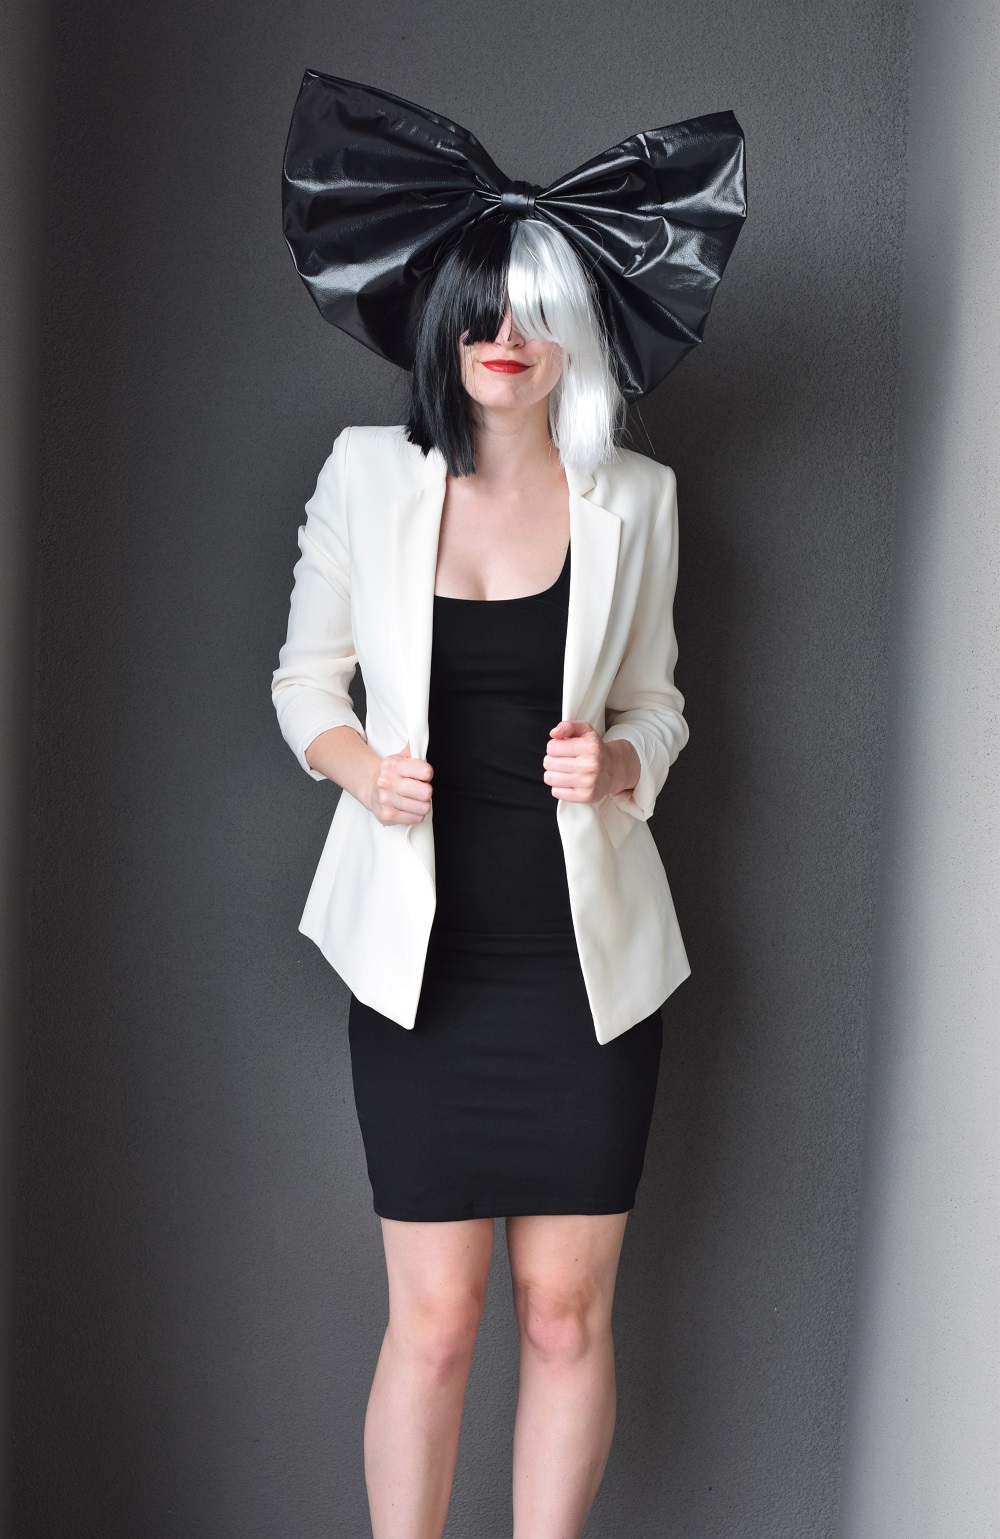 diy-sia-costume-by-bunny-baubles-blog-1